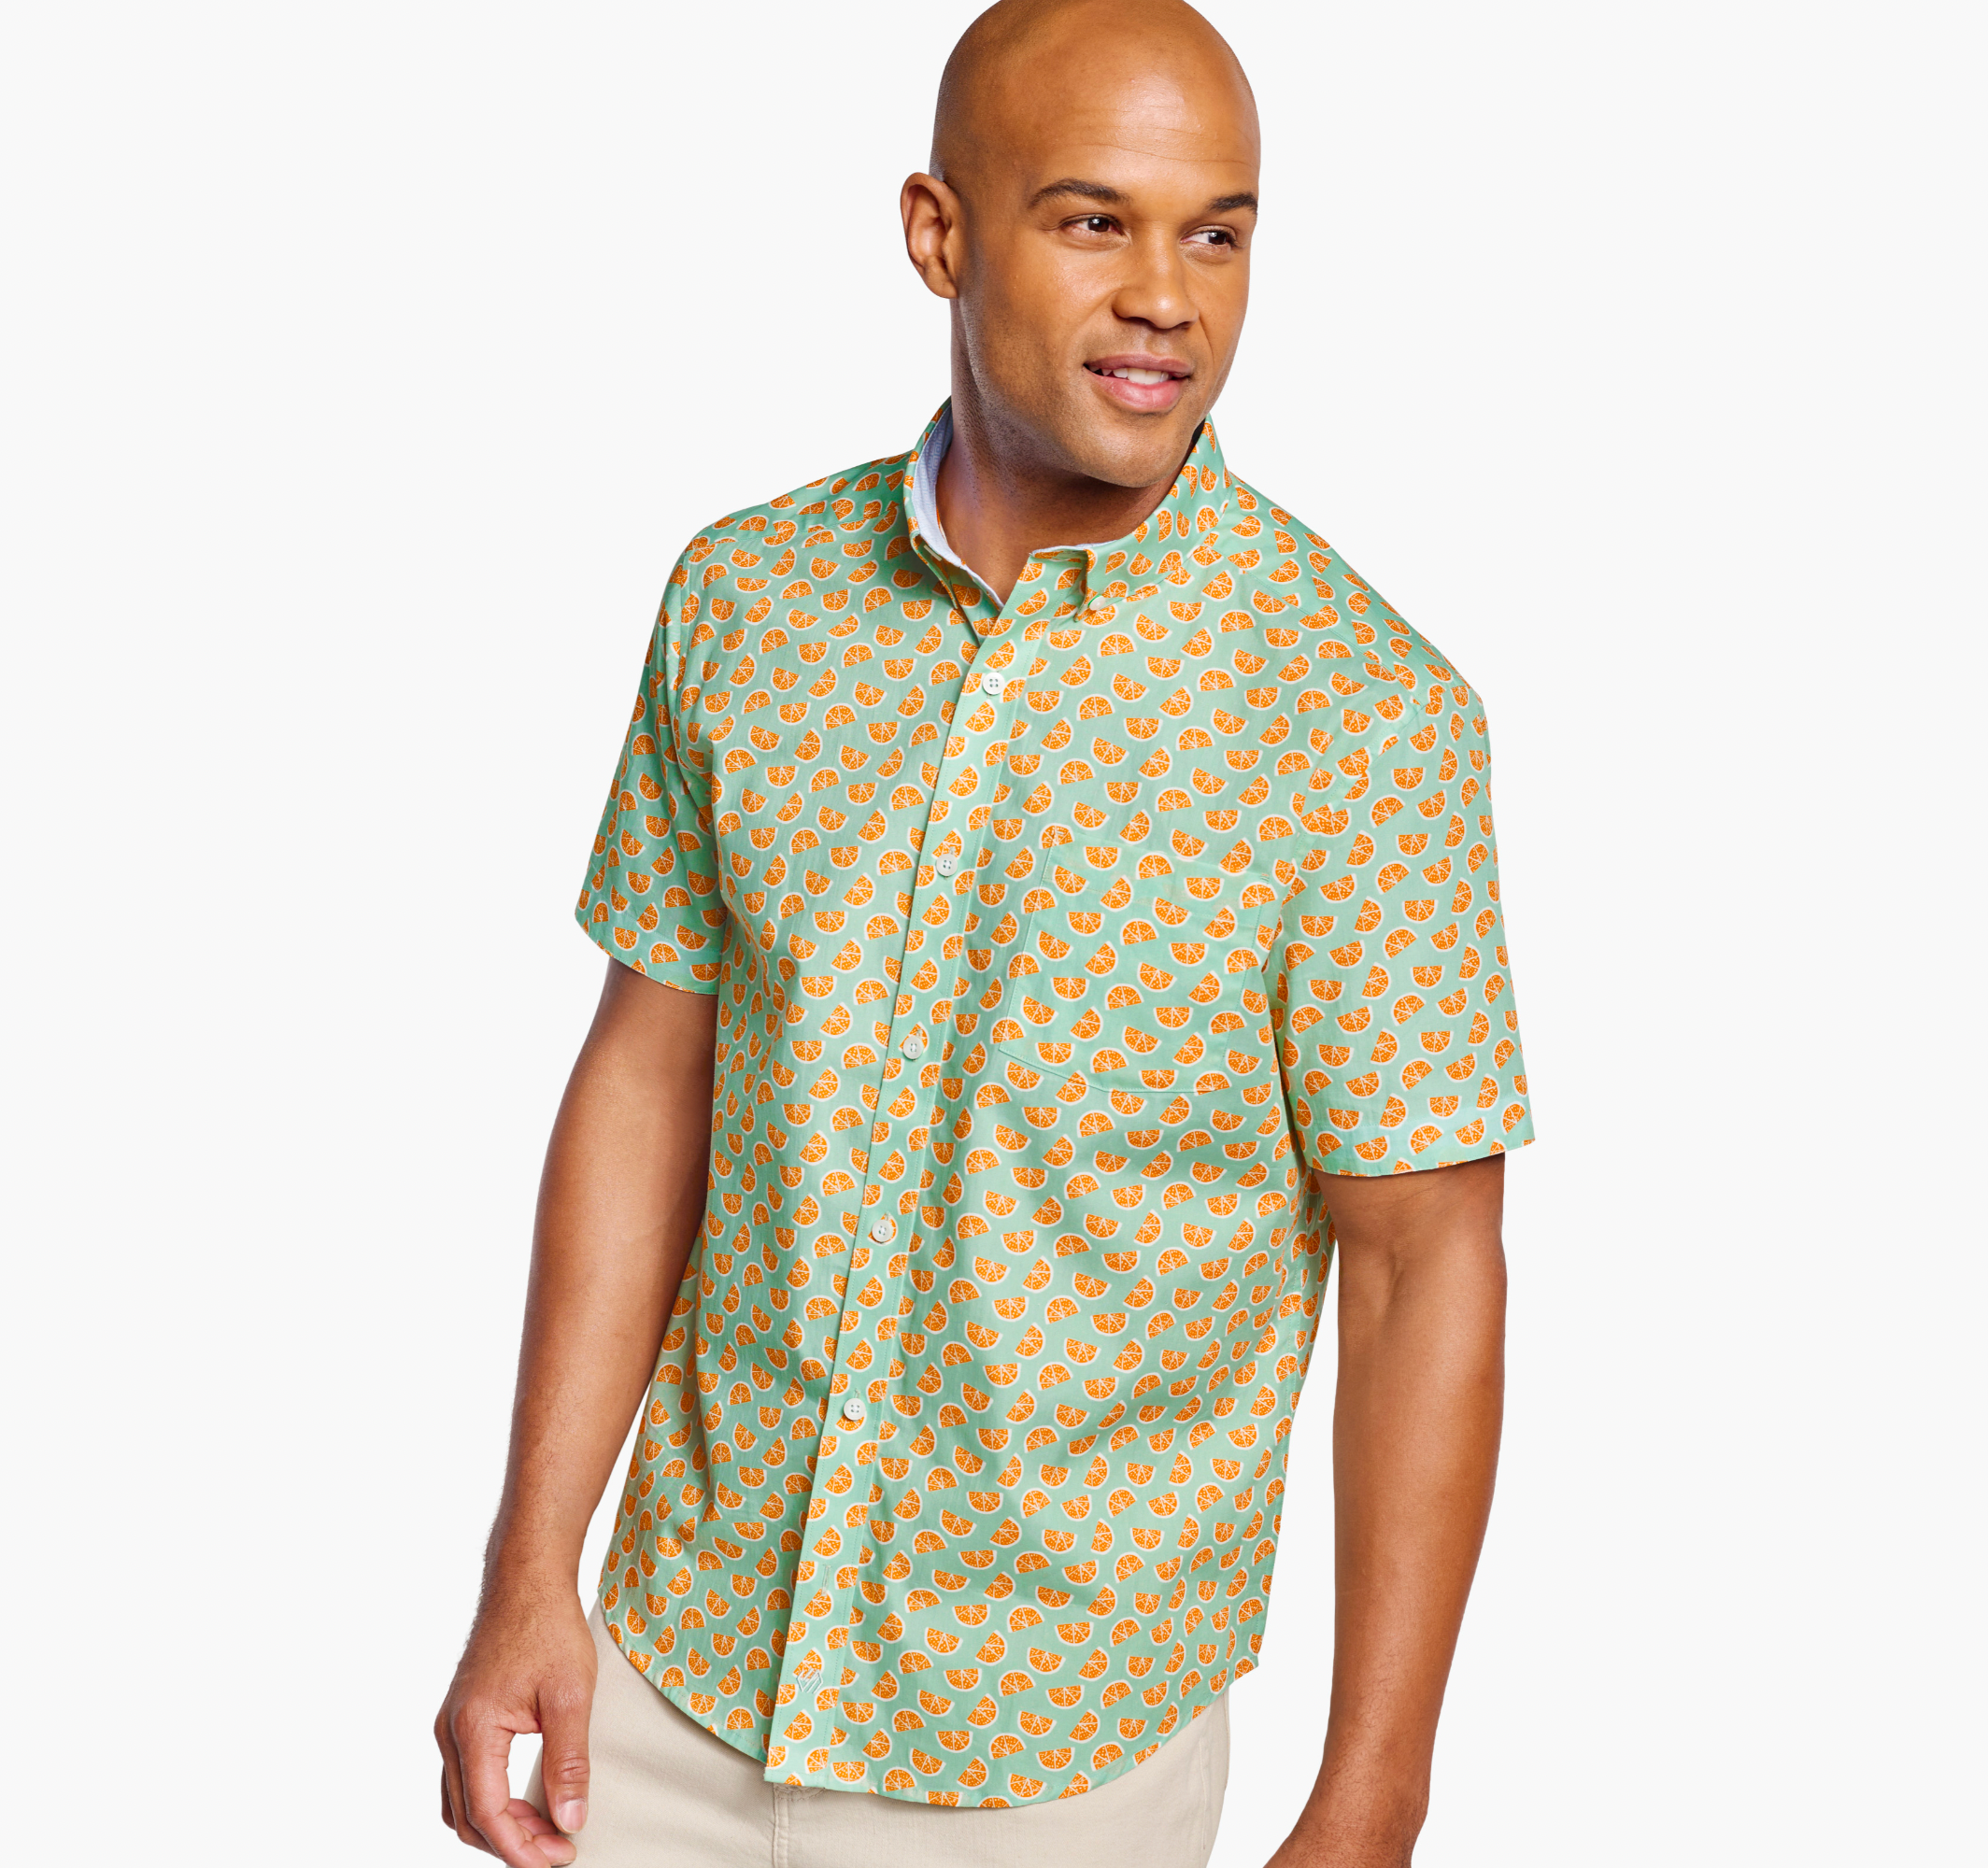 Upgrade your spring wardrobe with the Johnston&Murphy Short Sleeve Shirt. Stay comfortable and stylish while enjoying the warmer weather.